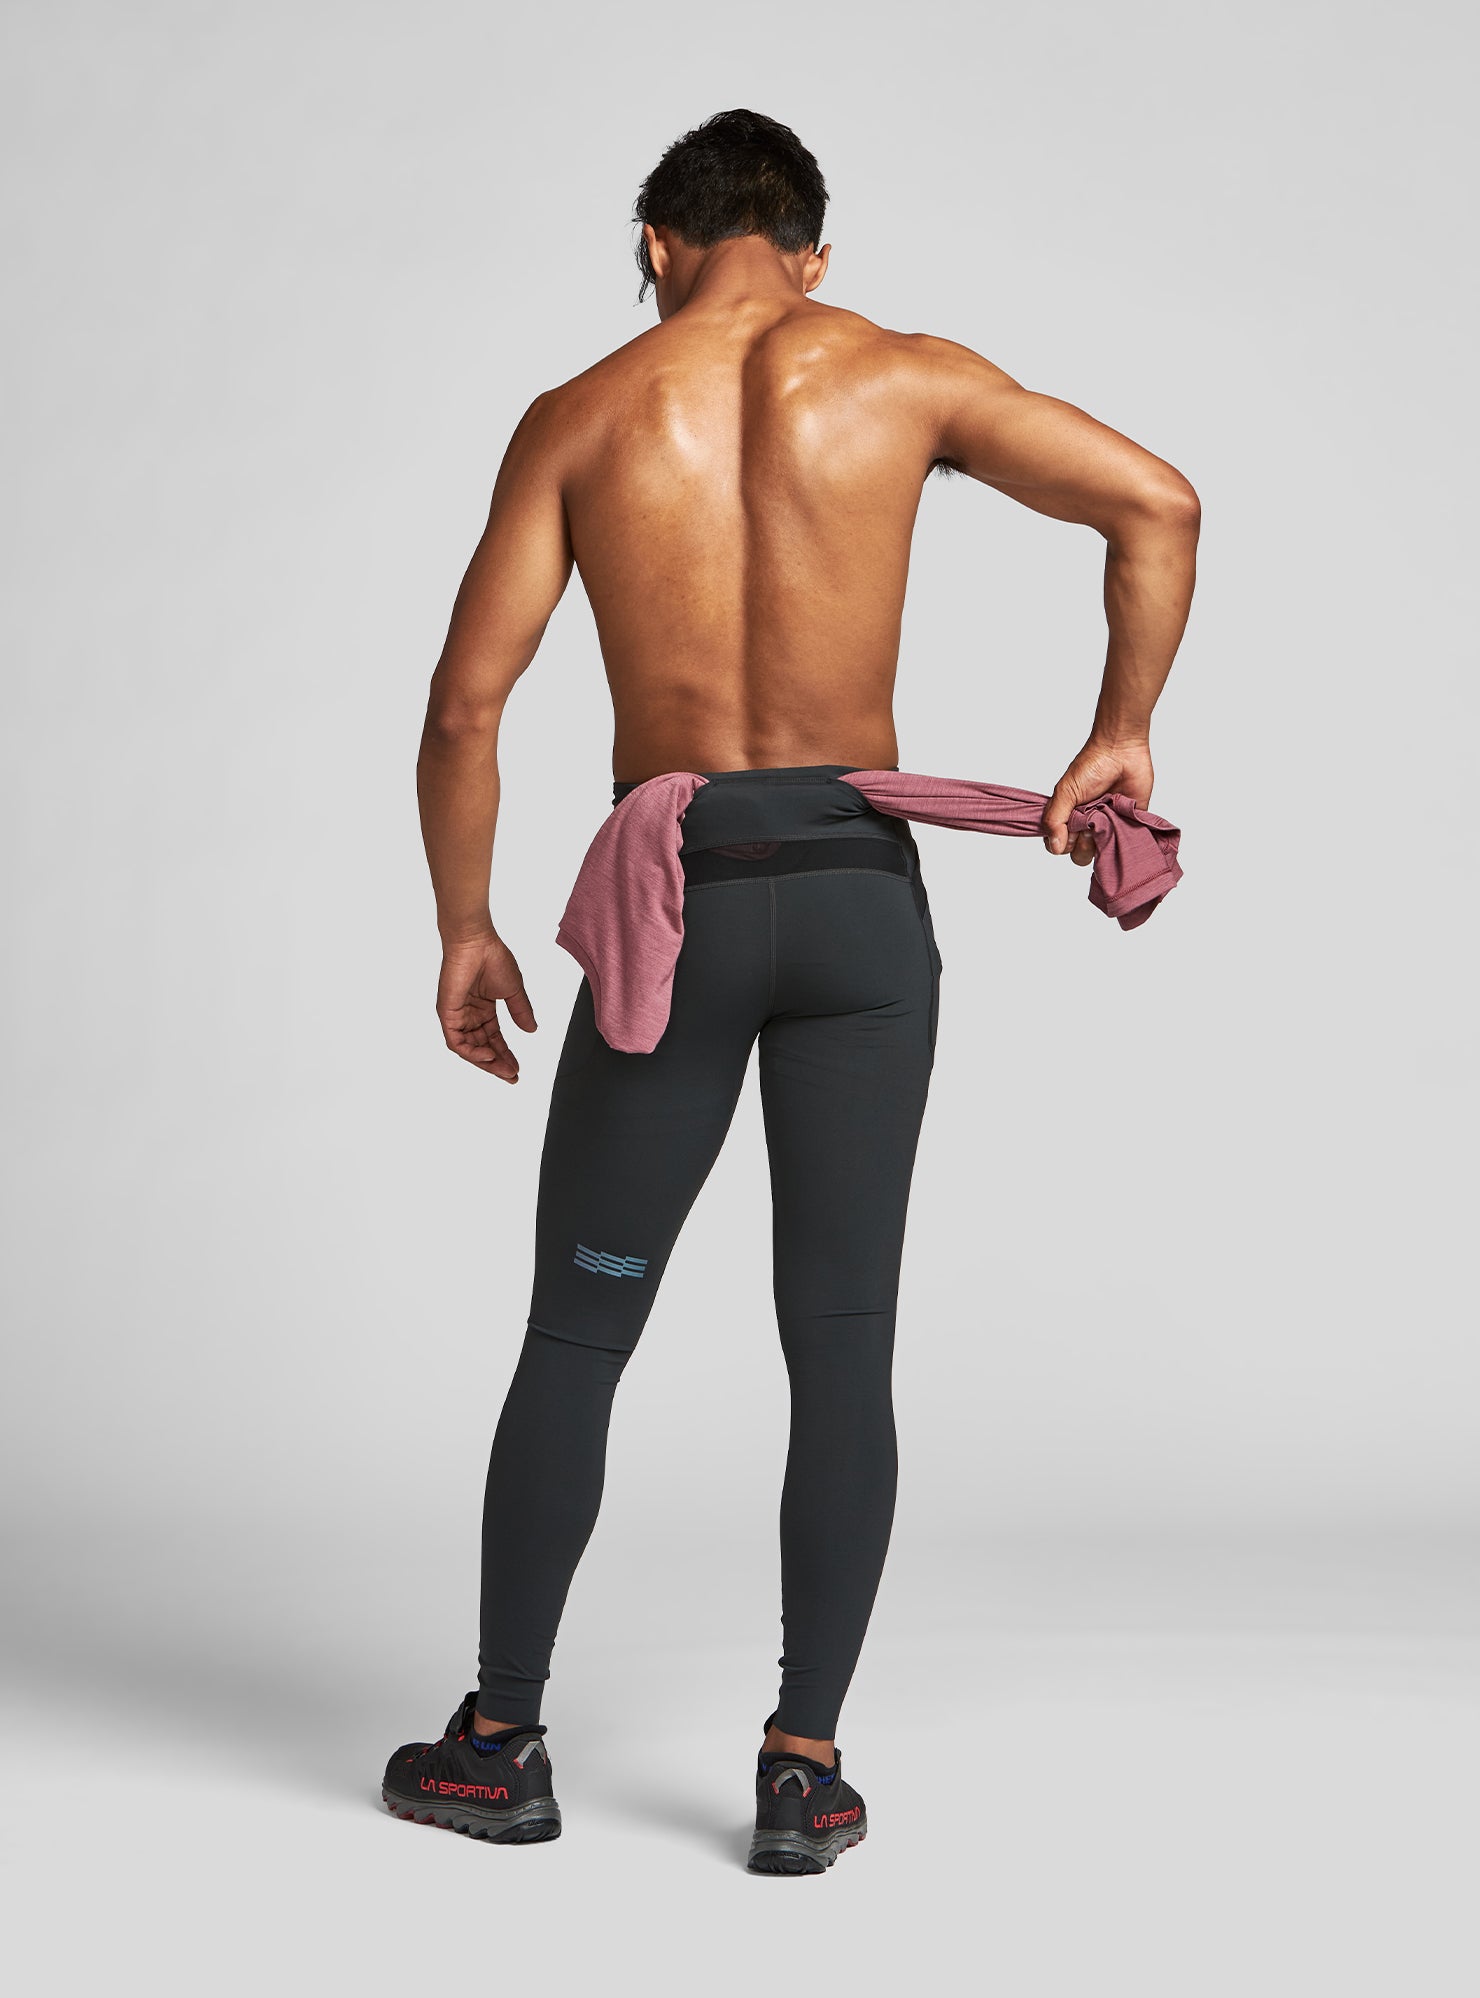 The 10 Best Men's Running Tights for Cold - Leather Tube Sandals